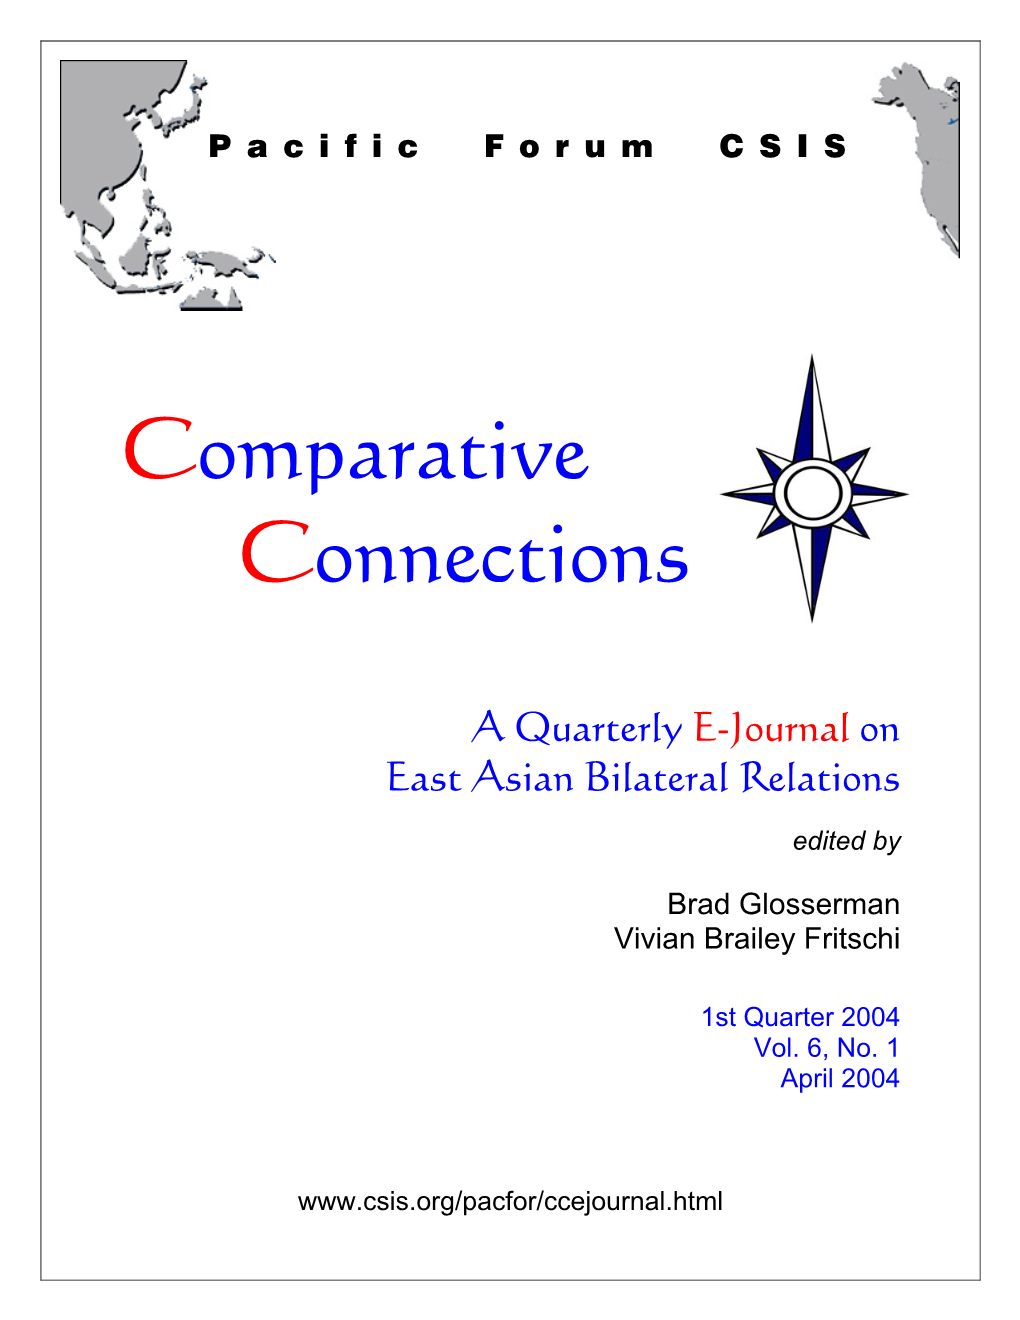 A Quarterly E-Journal on East Asian Bilateral Relations